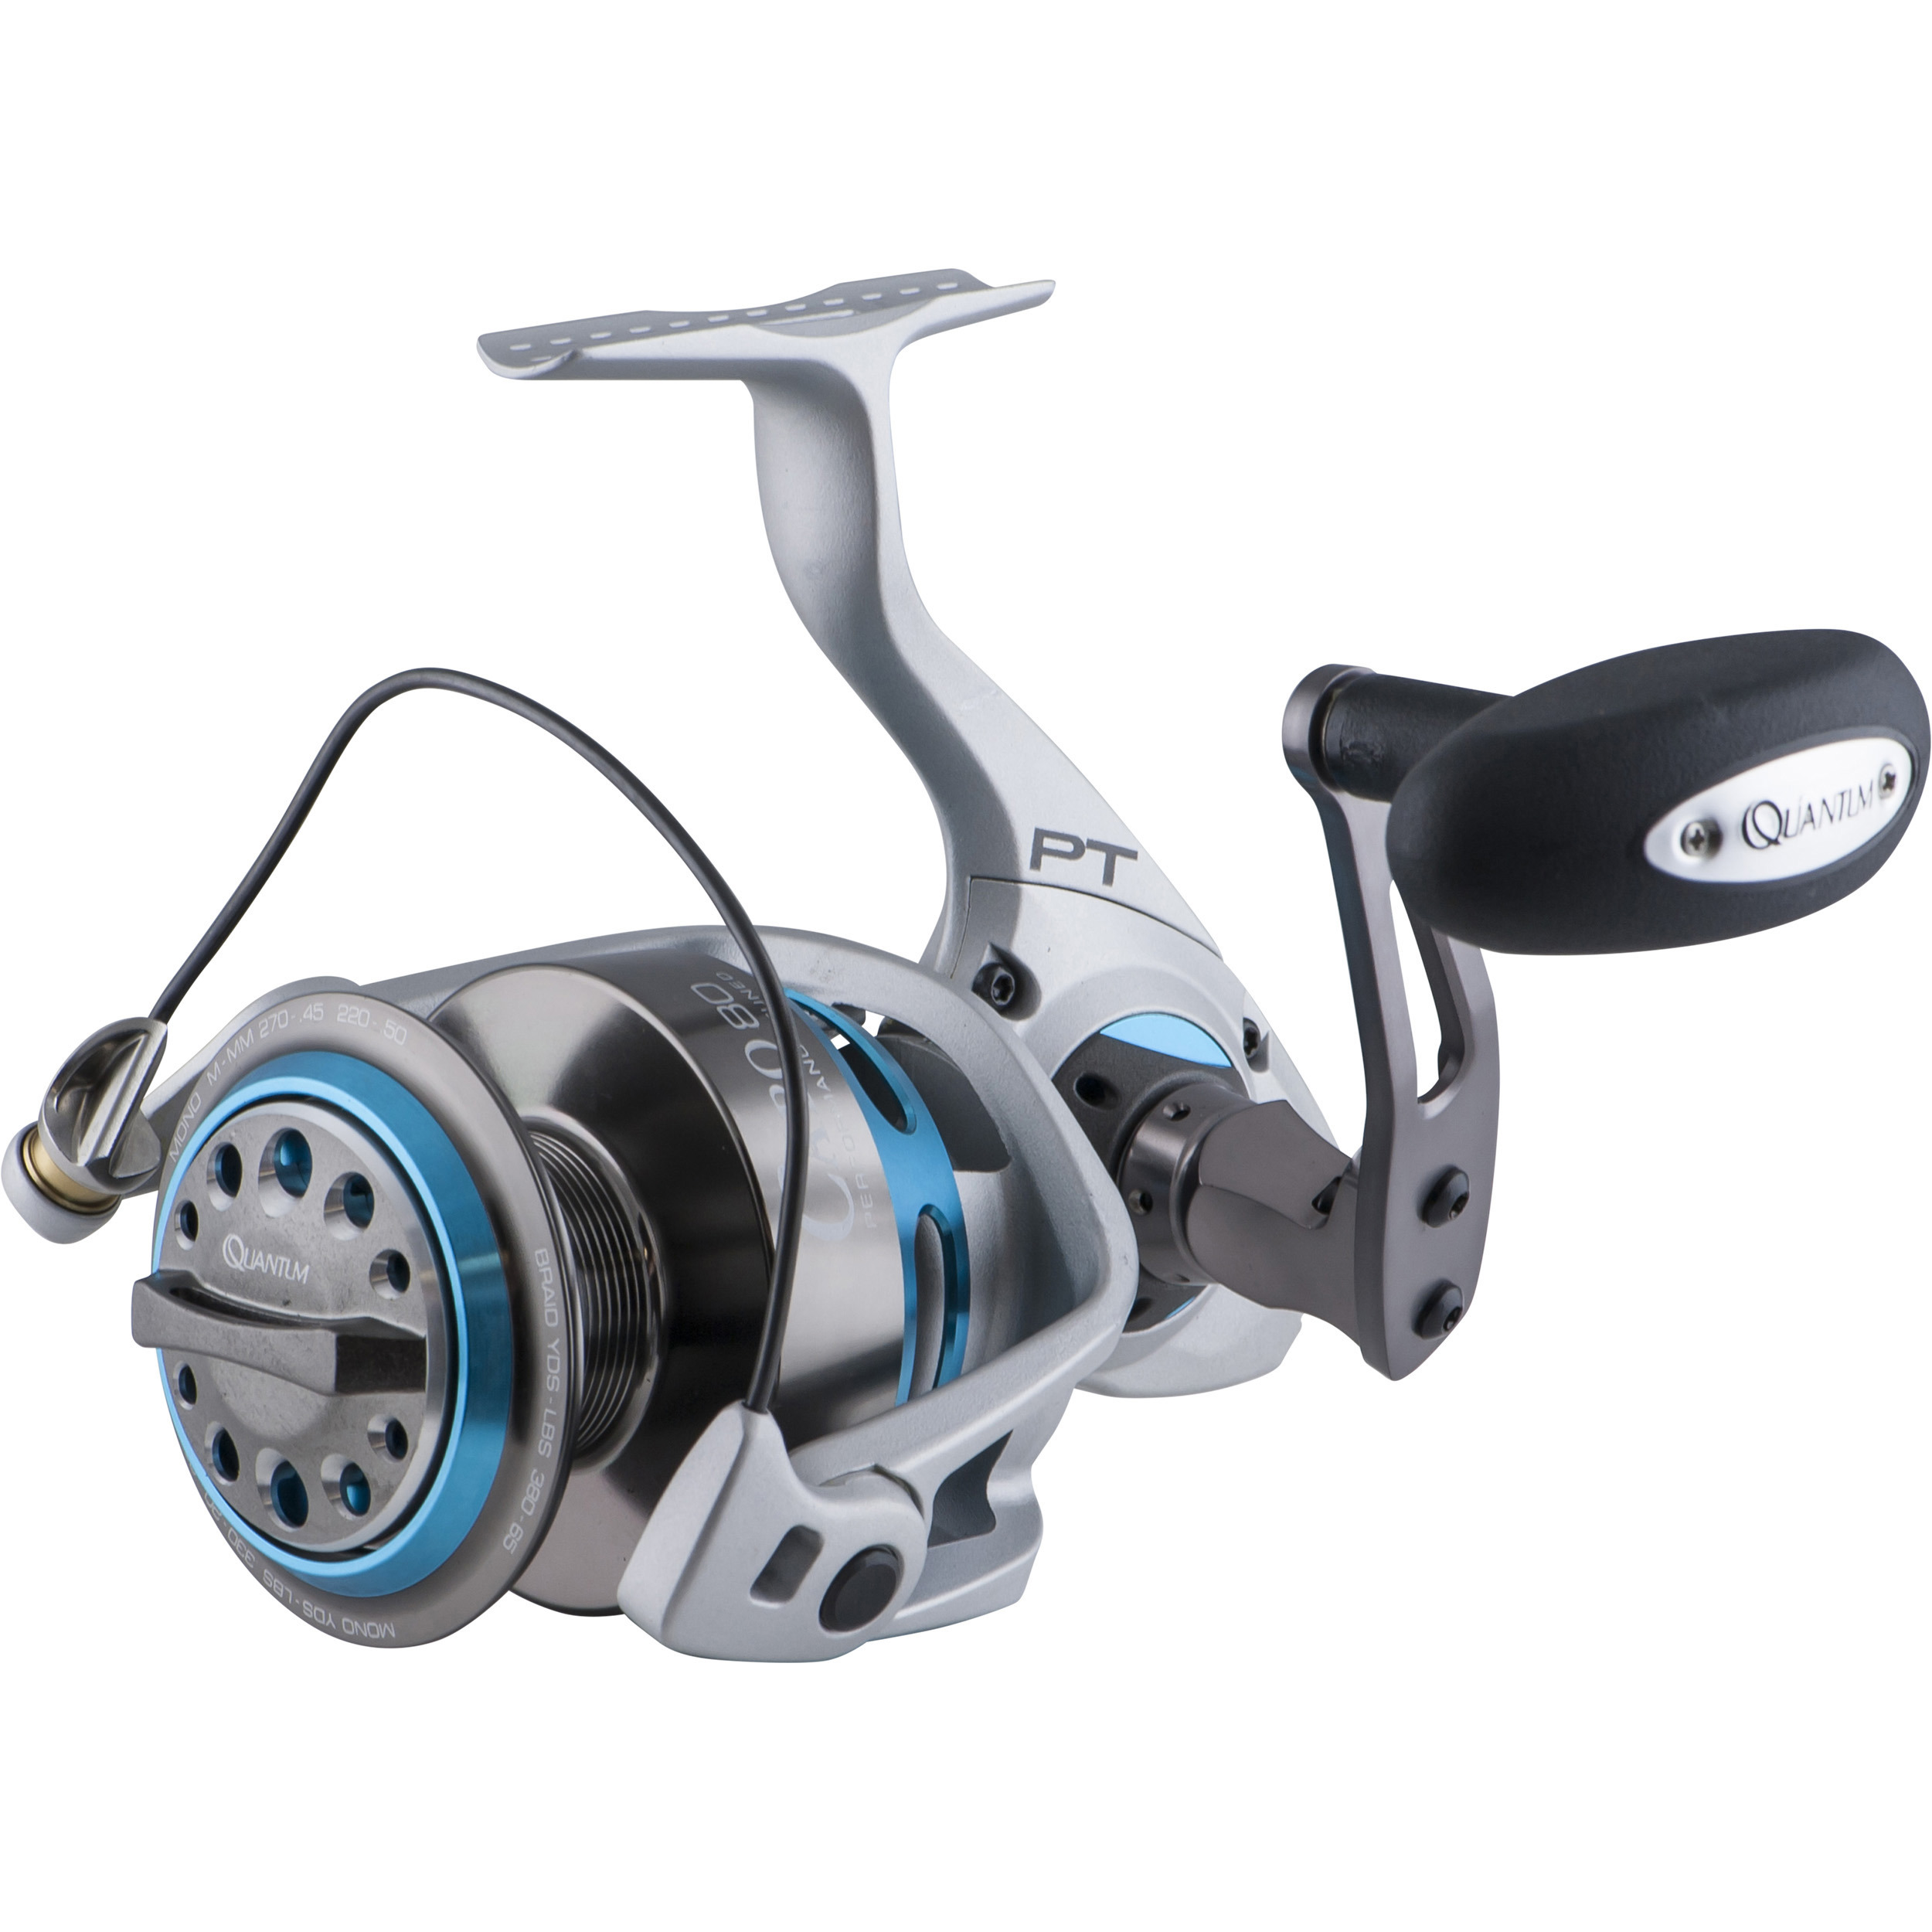 Quantum Cabo Salttwater Spinning Reel CABO 80 w spiderwire 50 lbs camo 海外  即決 - スキル、知識